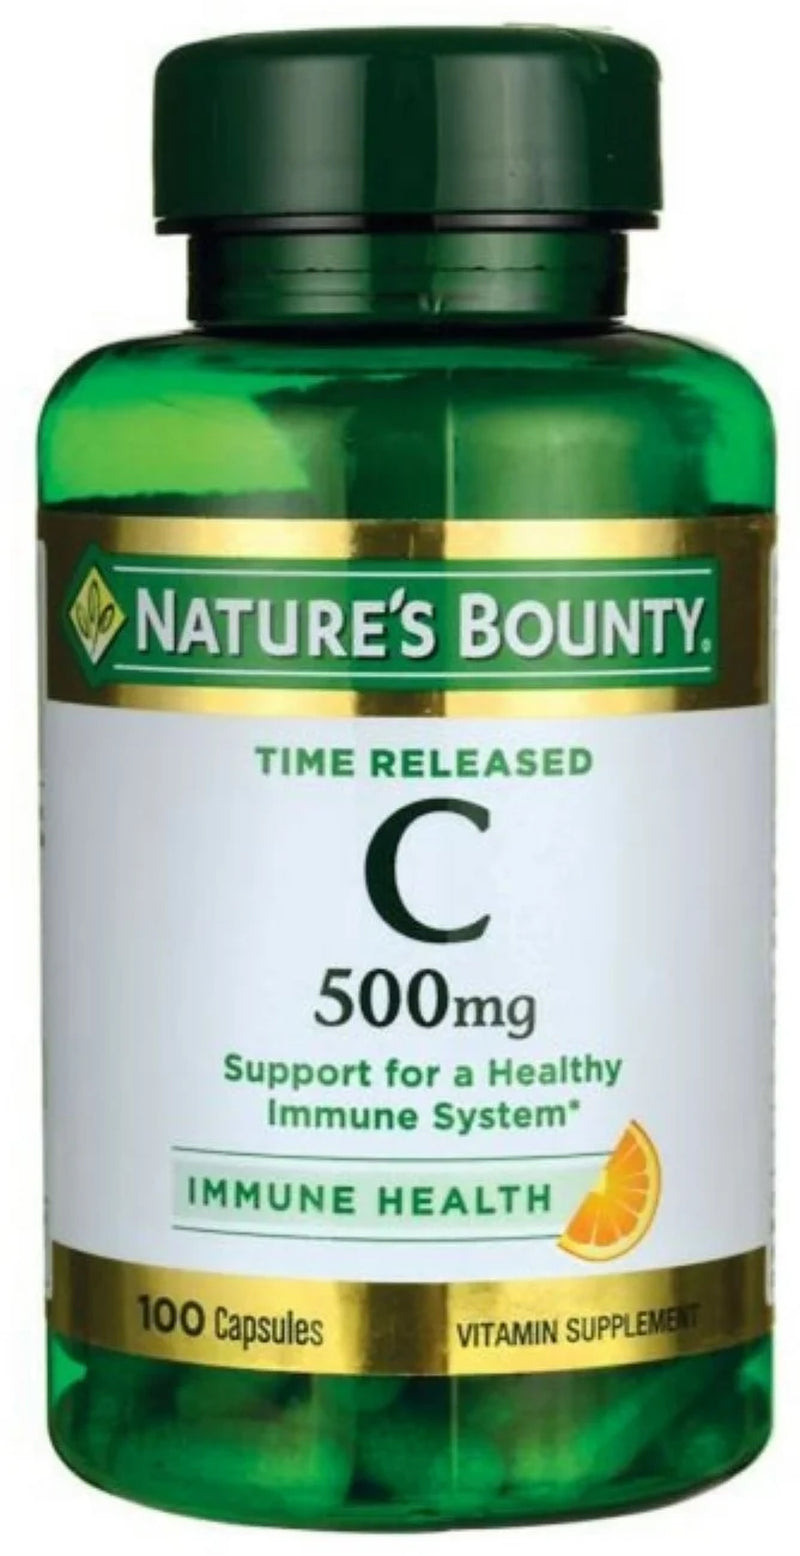 Nature'S Bounty Vitamin C 500 Mg Capsules Time Released 100 Capsules (Pack of 6)